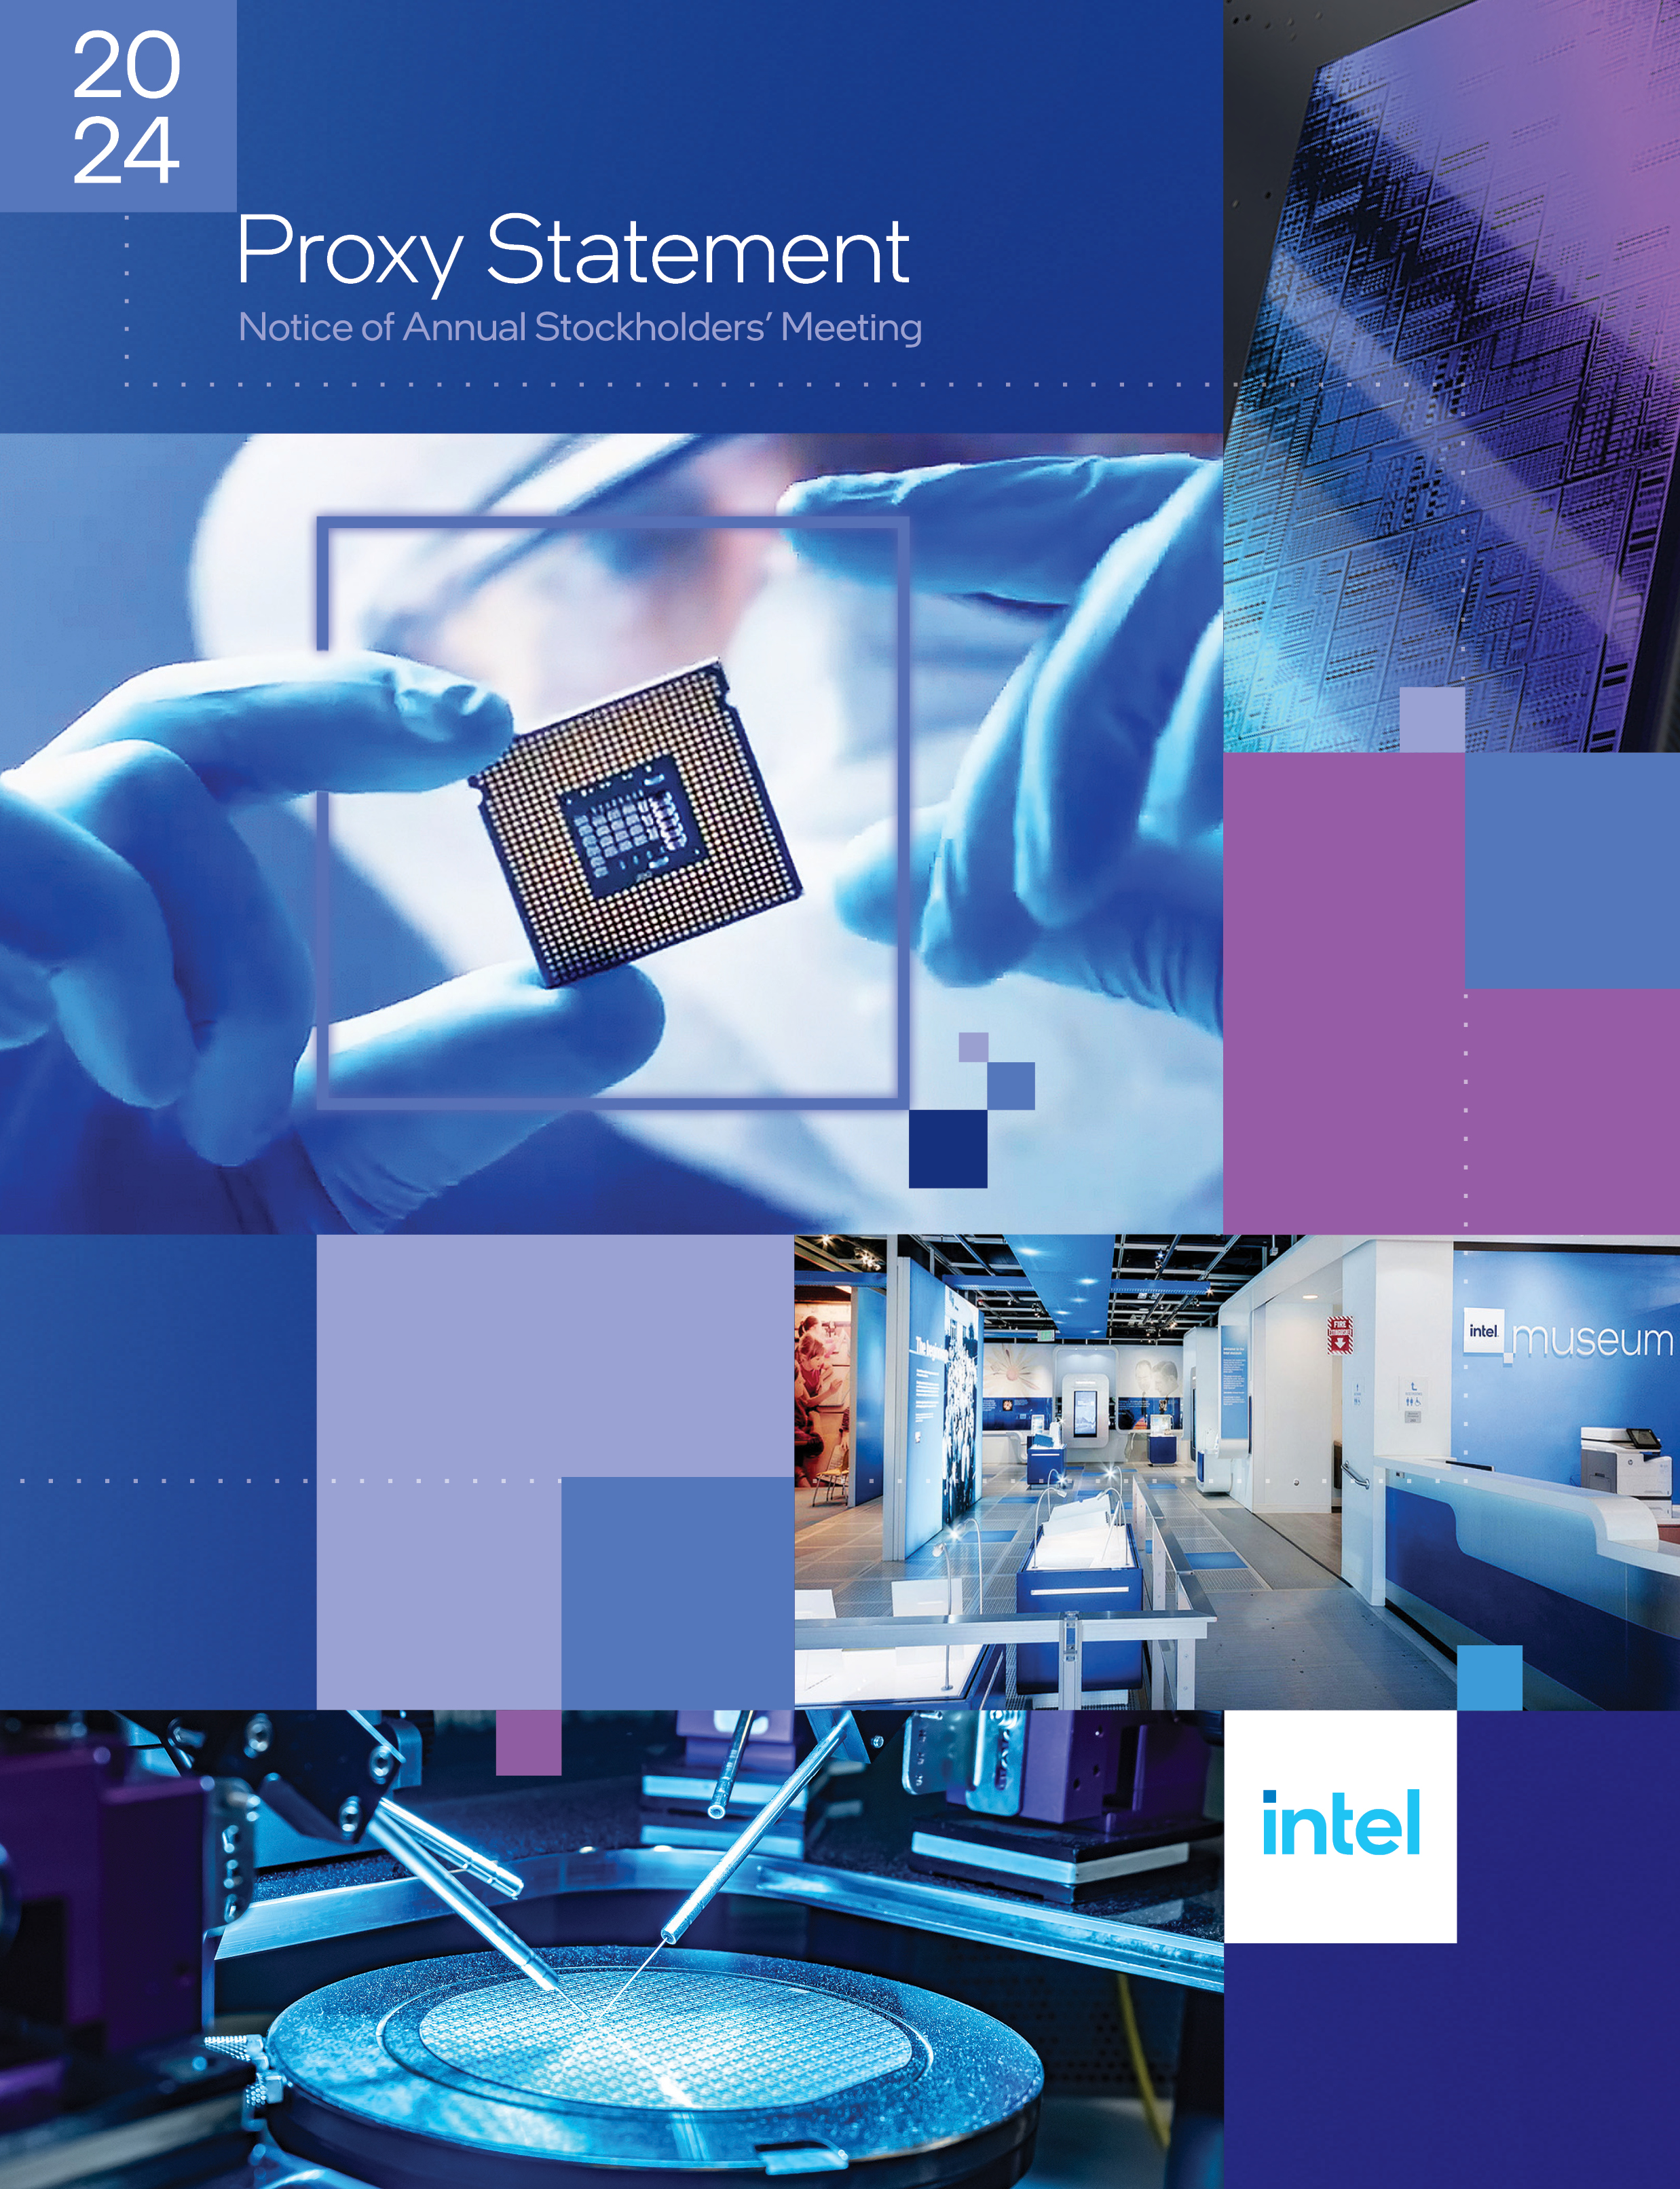 426889(1)_52_Intel NPS_Front Cover.jpg